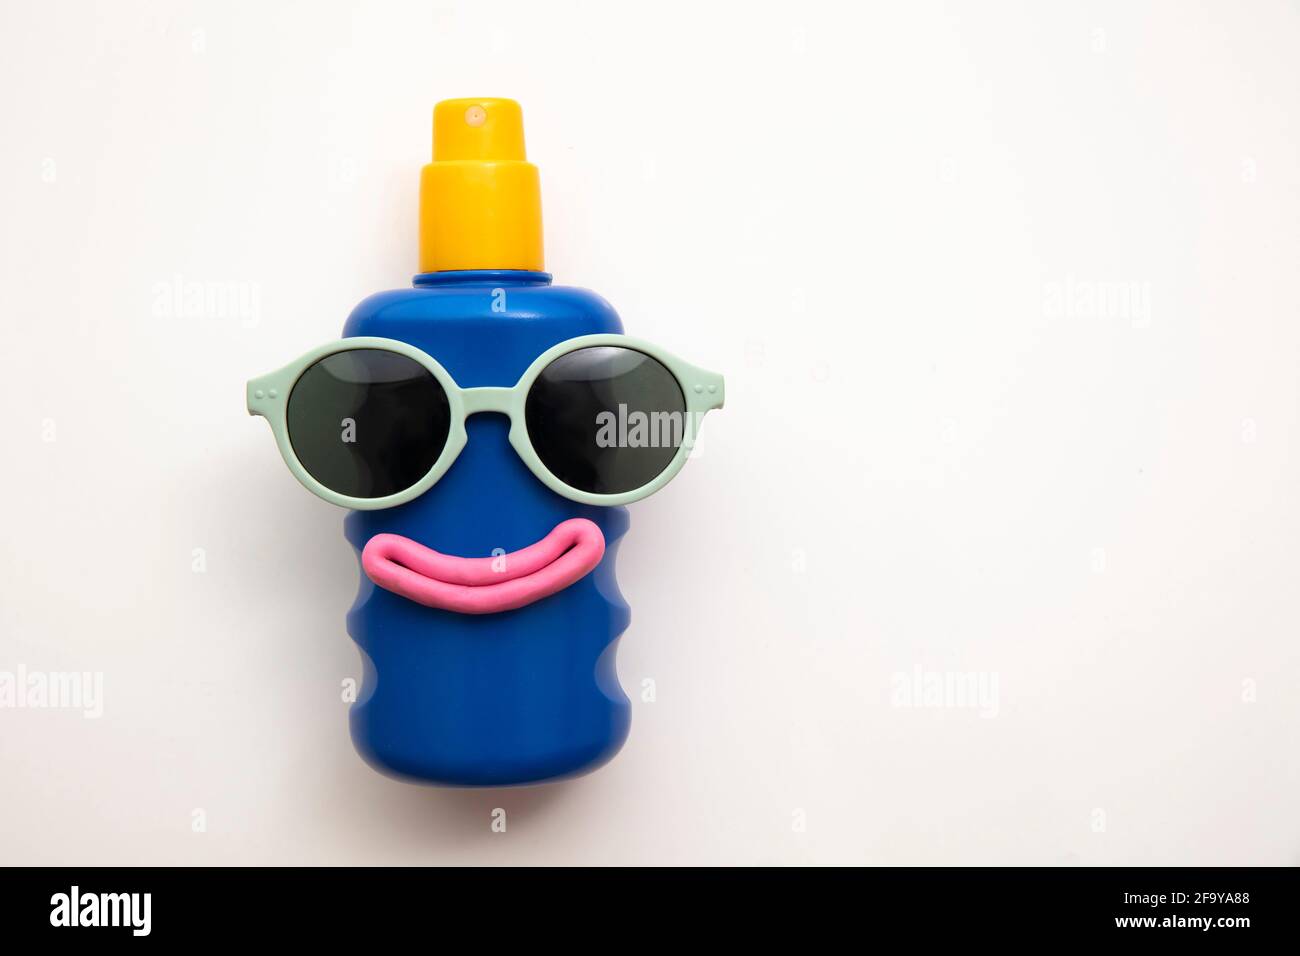 Suncream lotion bottle with a happy face and sunglasses Stock Photo